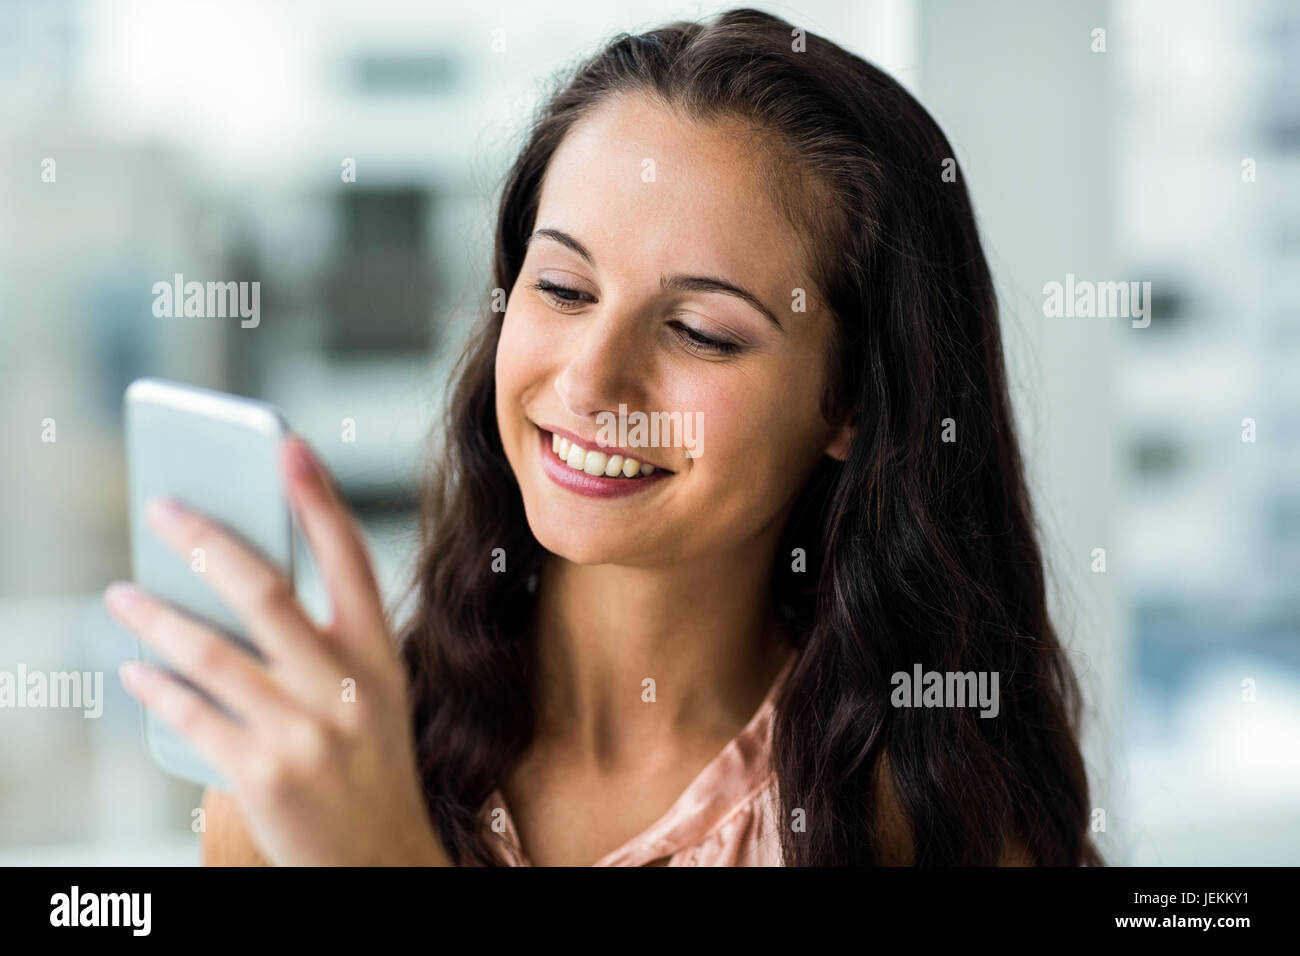 Smiling woman using smartphone Banque D'Images